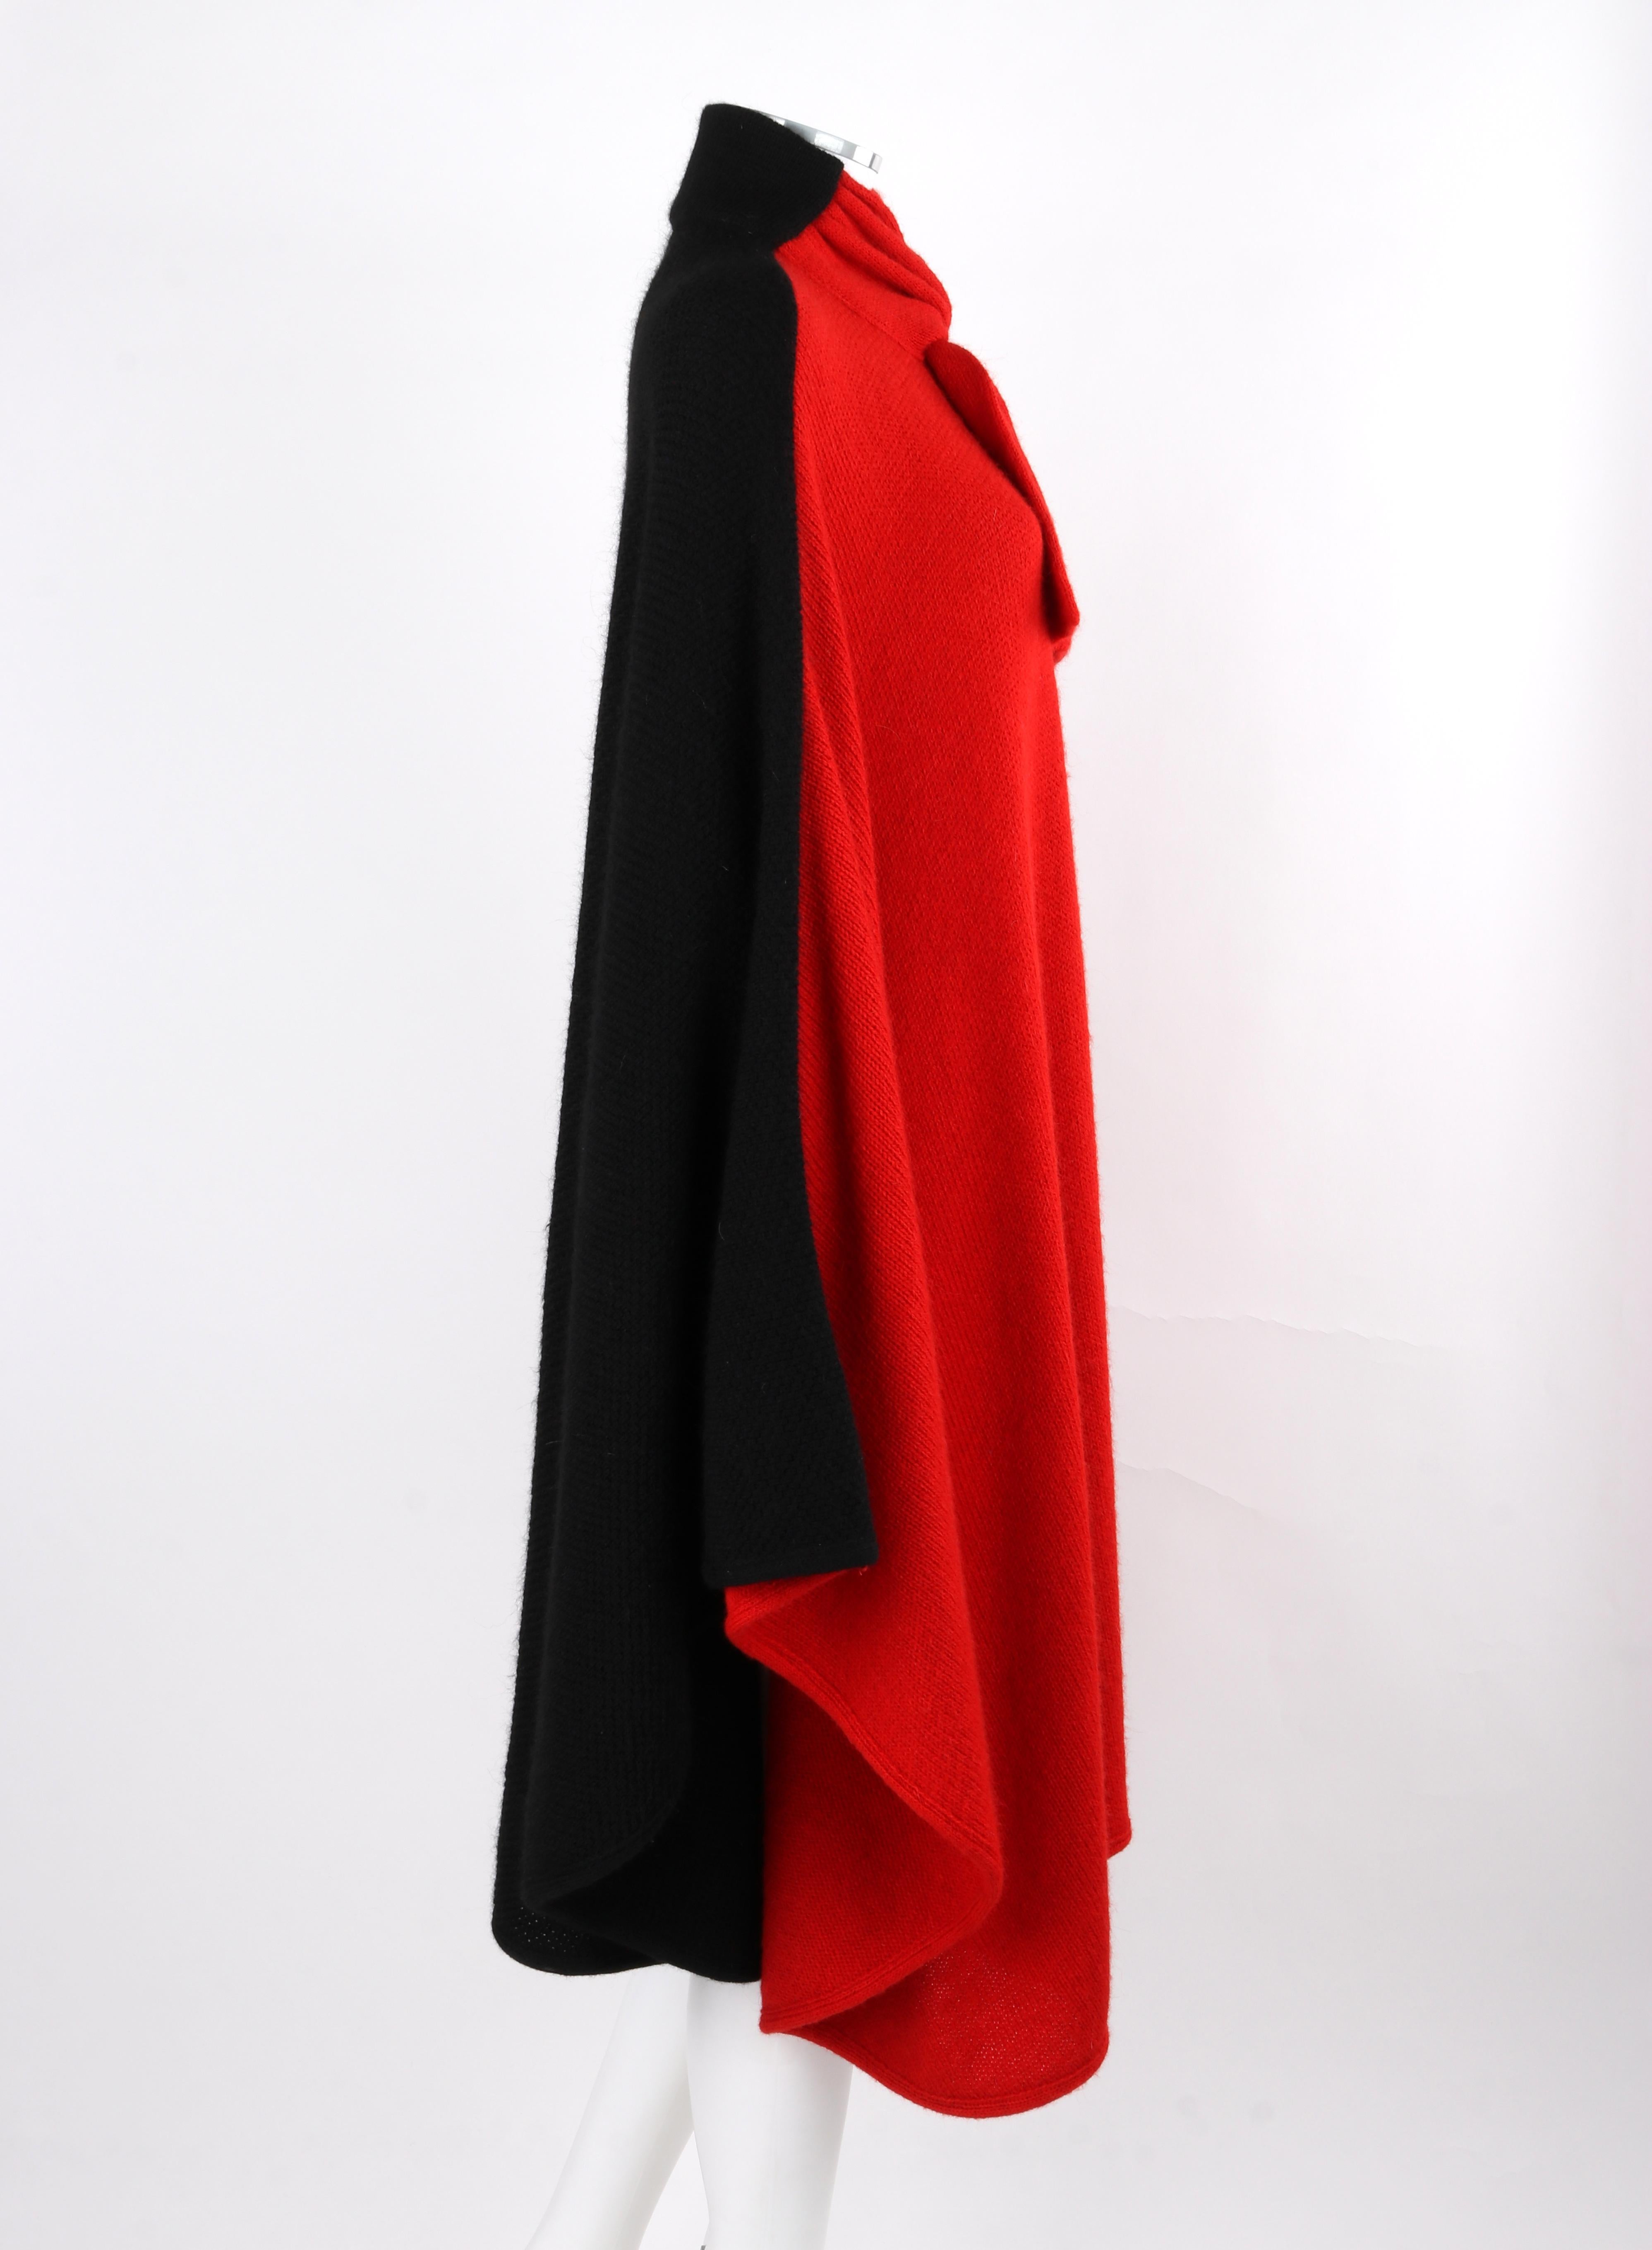 VALENTINO Knitwear c.1980's Vtg Red Black Alpaca Wool Knit Scarf Tie Button Cape For Sale 3